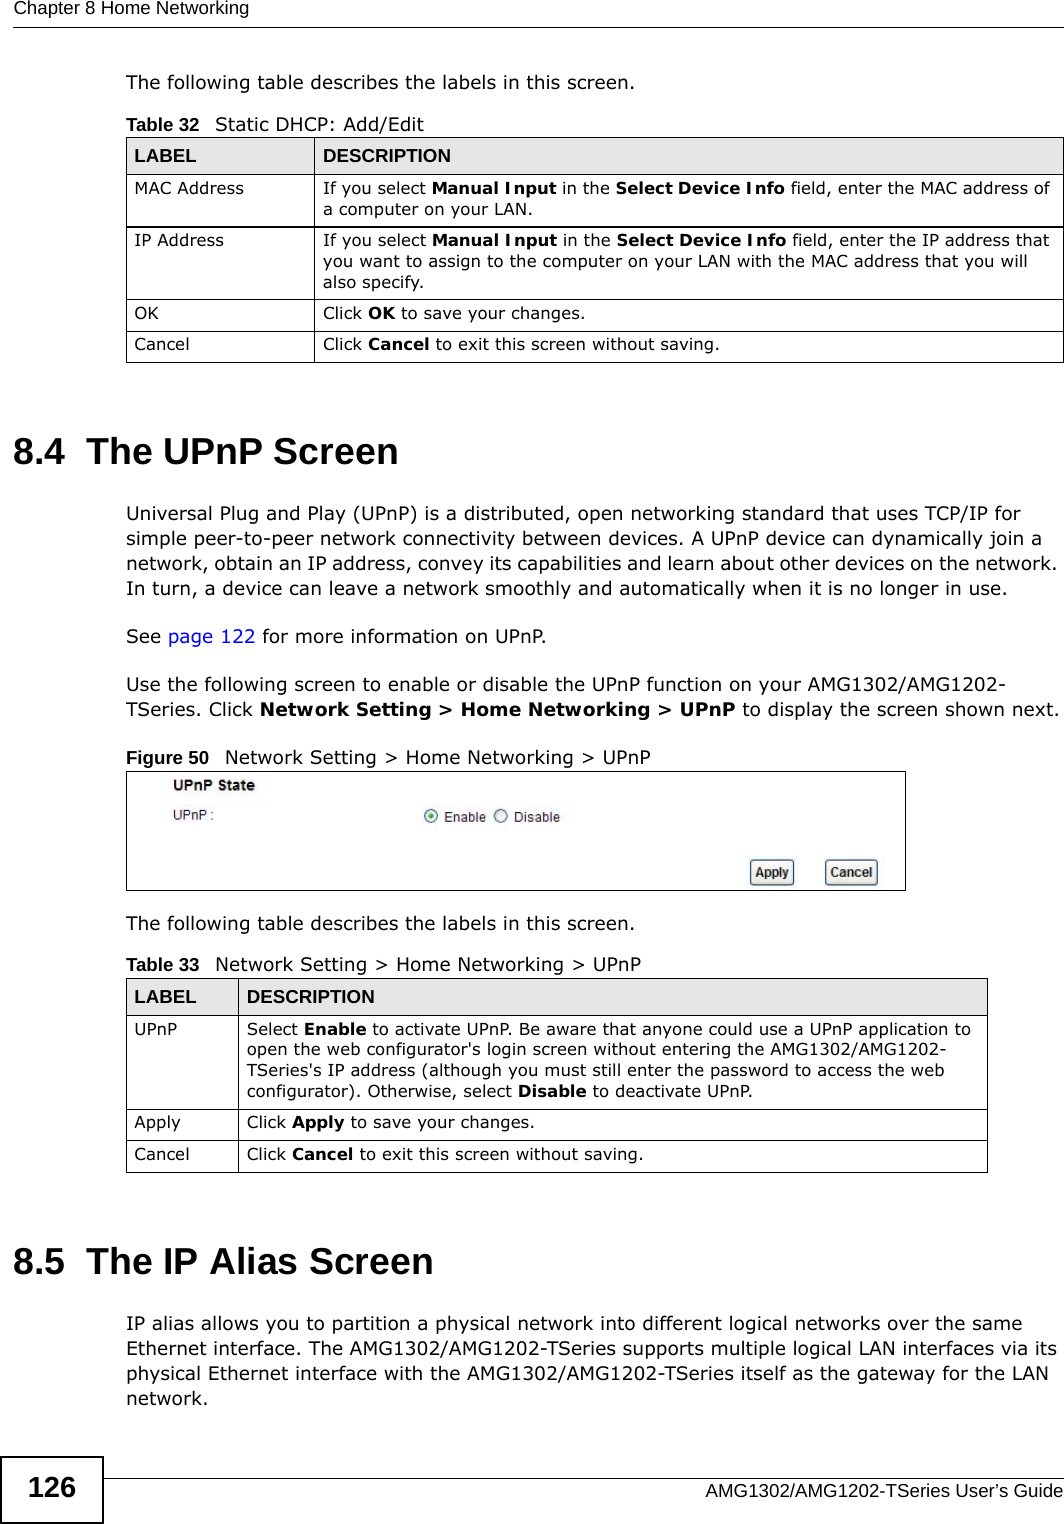 Chapter 8 Home NetworkingAMG1302/AMG1202-TSeries User’s Guide126The following table describes the labels in this screen.8.4  The UPnP ScreenUniversal Plug and Play (UPnP) is a distributed, open networking standard that uses TCP/IP for simple peer-to-peer network connectivity between devices. A UPnP device can dynamically join a network, obtain an IP address, convey its capabilities and learn about other devices on the network. In turn, a device can leave a network smoothly and automatically when it is no longer in use.See page 122 for more information on UPnP.Use the following screen to enable or disable the UPnP function on your AMG1302/AMG1202-TSeries. Click Network Setting &gt; Home Networking &gt; UPnP to display the screen shown next.Figure 50   Network Setting &gt; Home Networking &gt; UPnPThe following table describes the labels in this screen.8.5  The IP Alias ScreenIP alias allows you to partition a physical network into different logical networks over the same Ethernet interface. The AMG1302/AMG1202-TSeries supports multiple logical LAN interfaces via its physical Ethernet interface with the AMG1302/AMG1202-TSeries itself as the gateway for the LAN network.Table 32   Static DHCP: Add/EditLABEL DESCRIPTIONMAC Address If you select Manual Input in the Select Device Info field, enter the MAC address of a computer on your LAN.IP Address If you select Manual Input in the Select Device Info field, enter the IP address that you want to assign to the computer on your LAN with the MAC address that you will also specify.OK Click OK to save your changes.Cancel Click Cancel to exit this screen without saving.Table 33   Network Setting &gt; Home Networking &gt; UPnPLABEL DESCRIPTIONUPnP Select Enable to activate UPnP. Be aware that anyone could use a UPnP application to open the web configurator&apos;s login screen without entering the AMG1302/AMG1202-TSeries&apos;s IP address (although you must still enter the password to access the web configurator). Otherwise, select Disable to deactivate UPnP.Apply Click Apply to save your changes.Cancel Click Cancel to exit this screen without saving.